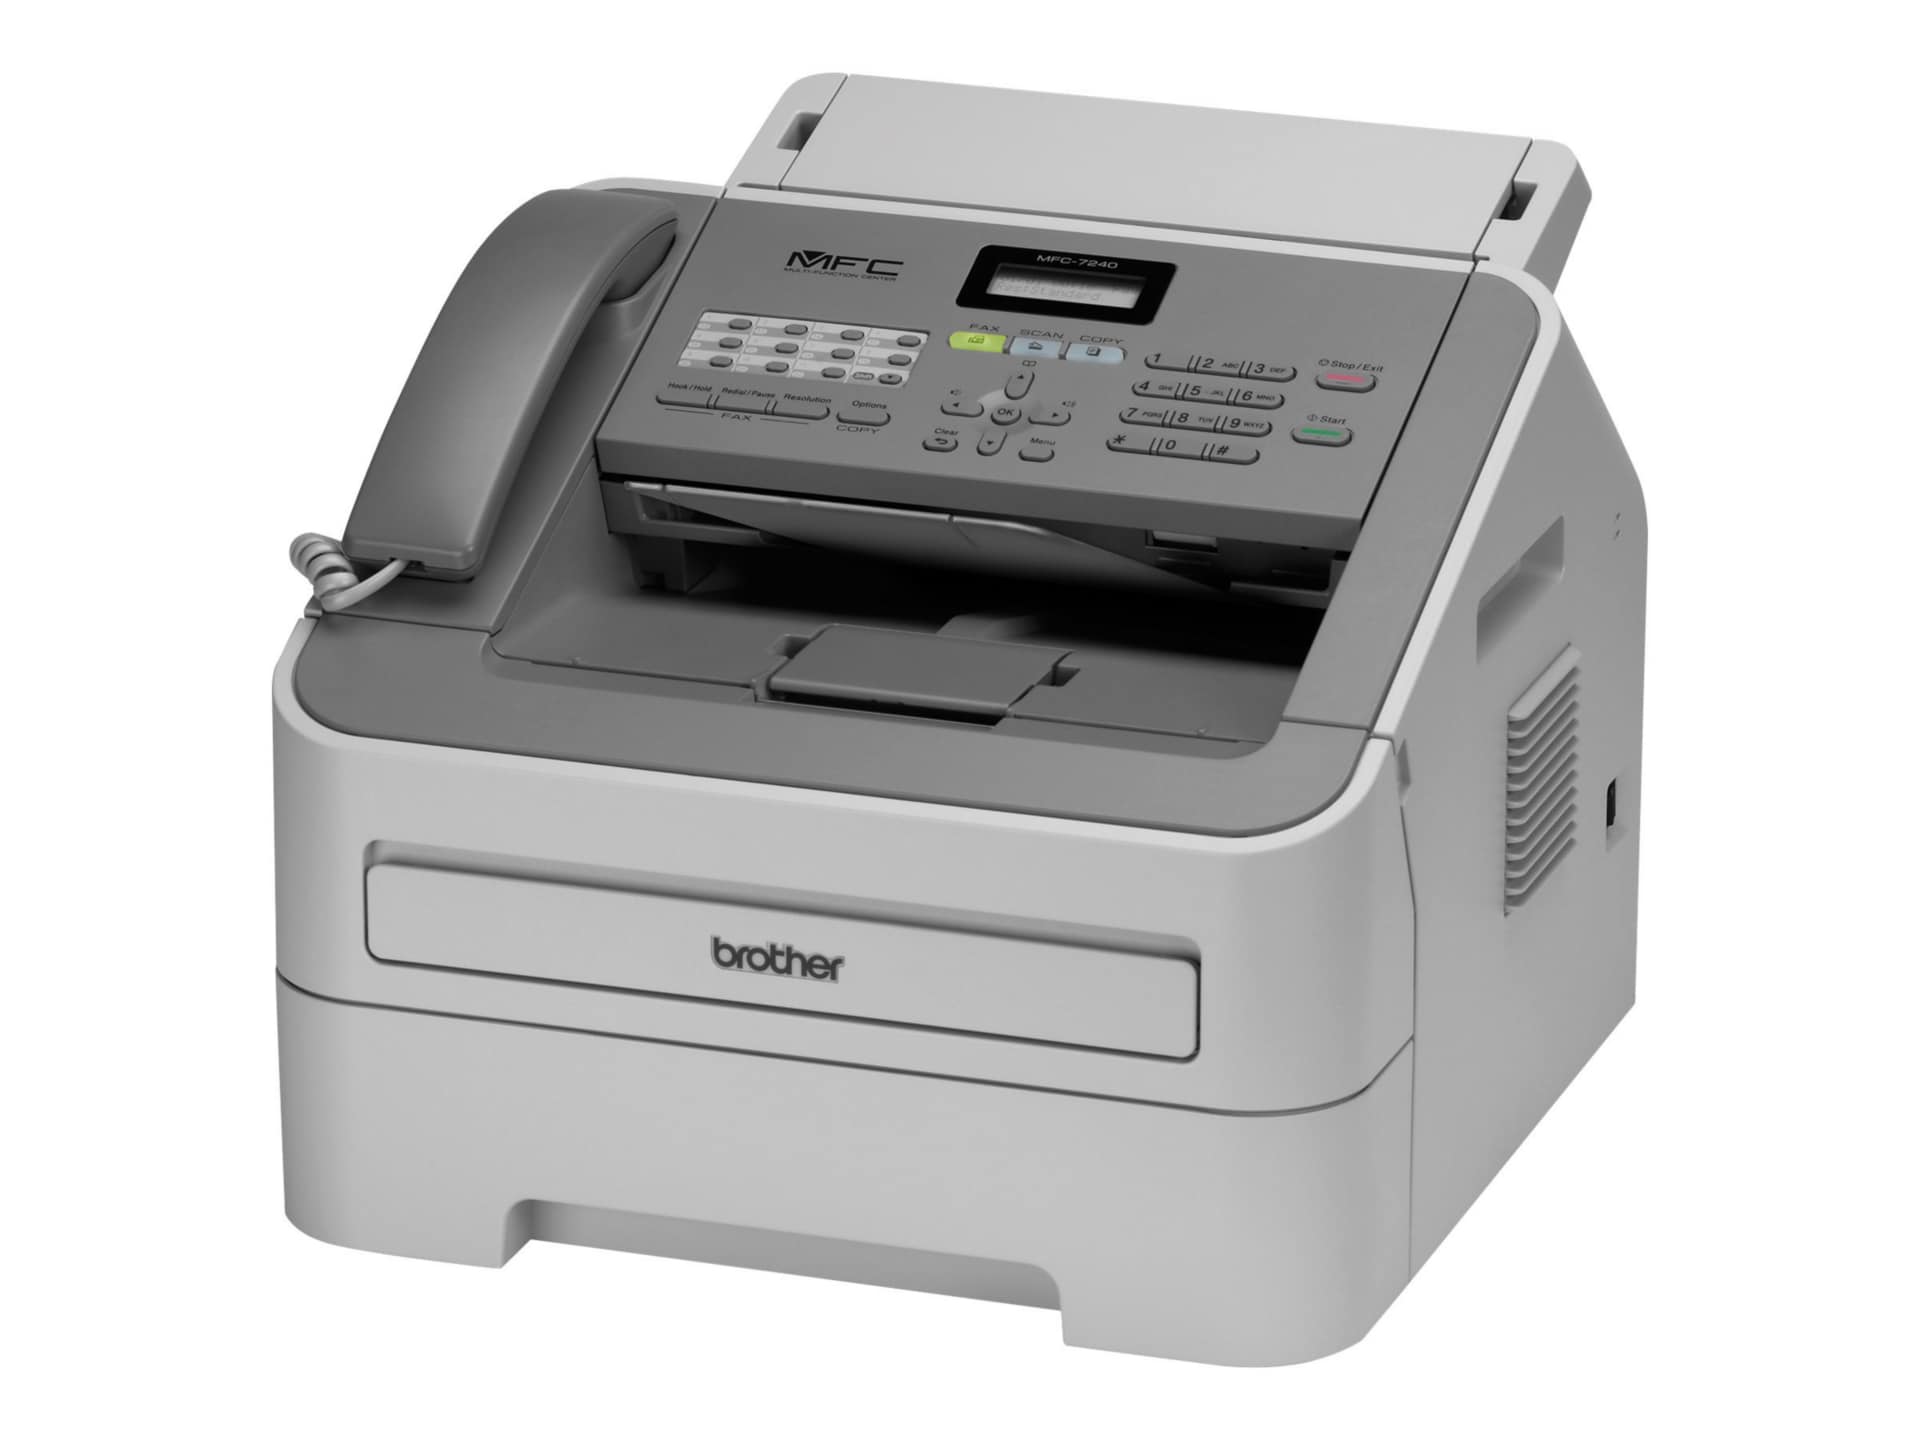 Brother MFC-7240 - multifunction printer - B/W - MFC7240 - All-in